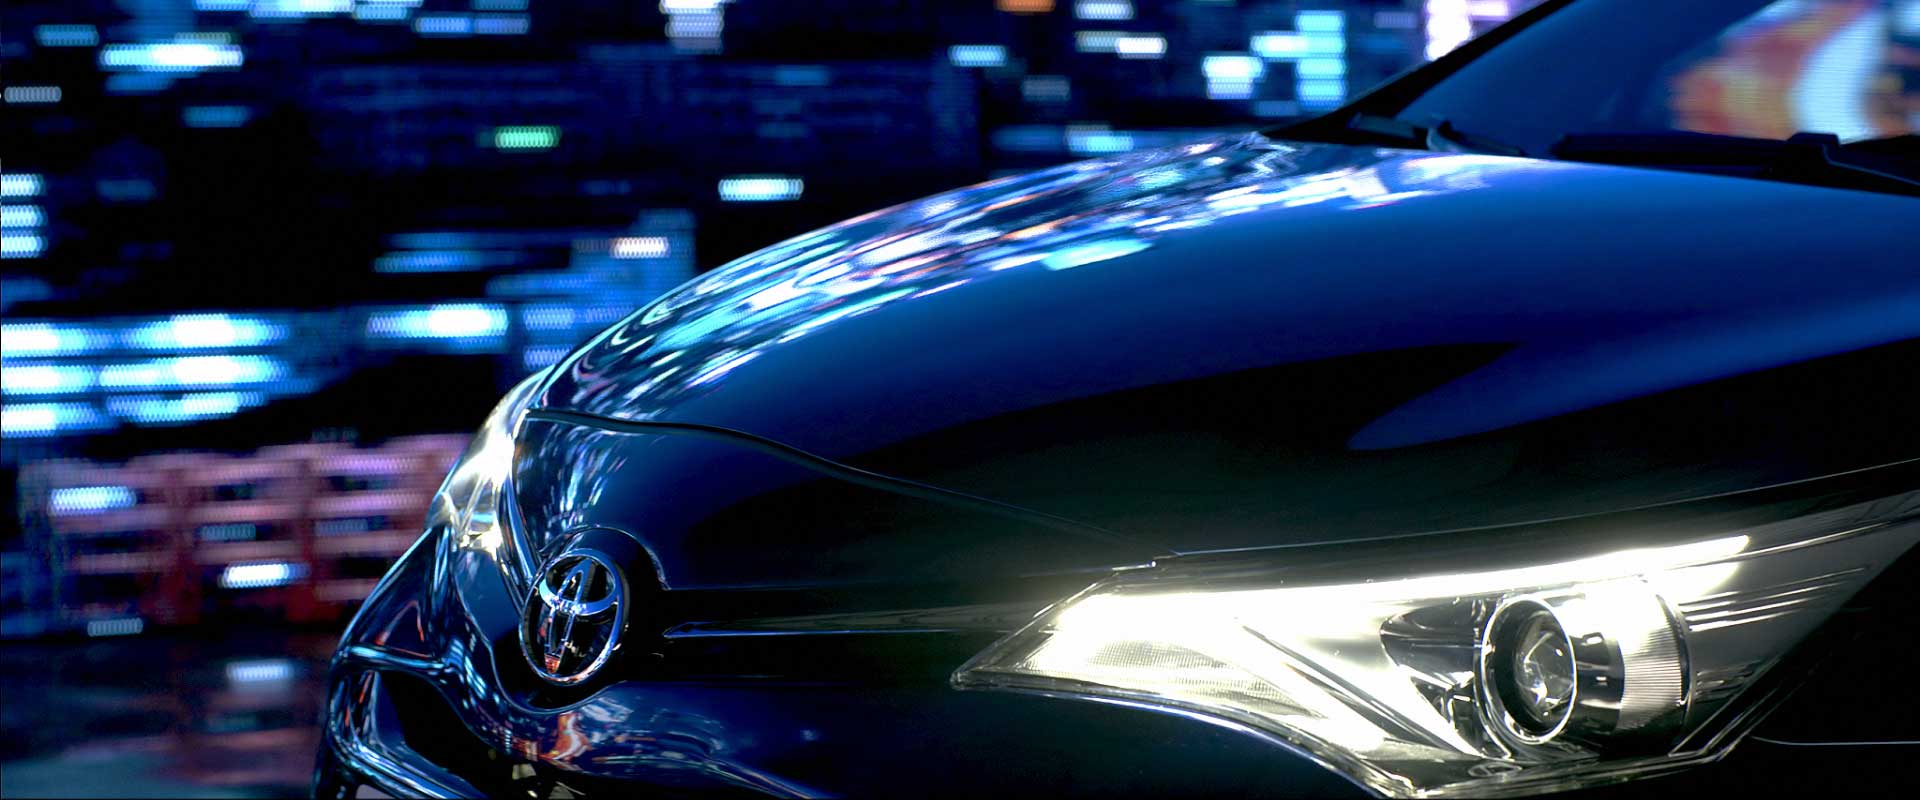 Frontview detail. Still from Toyota Avensis - Commercial